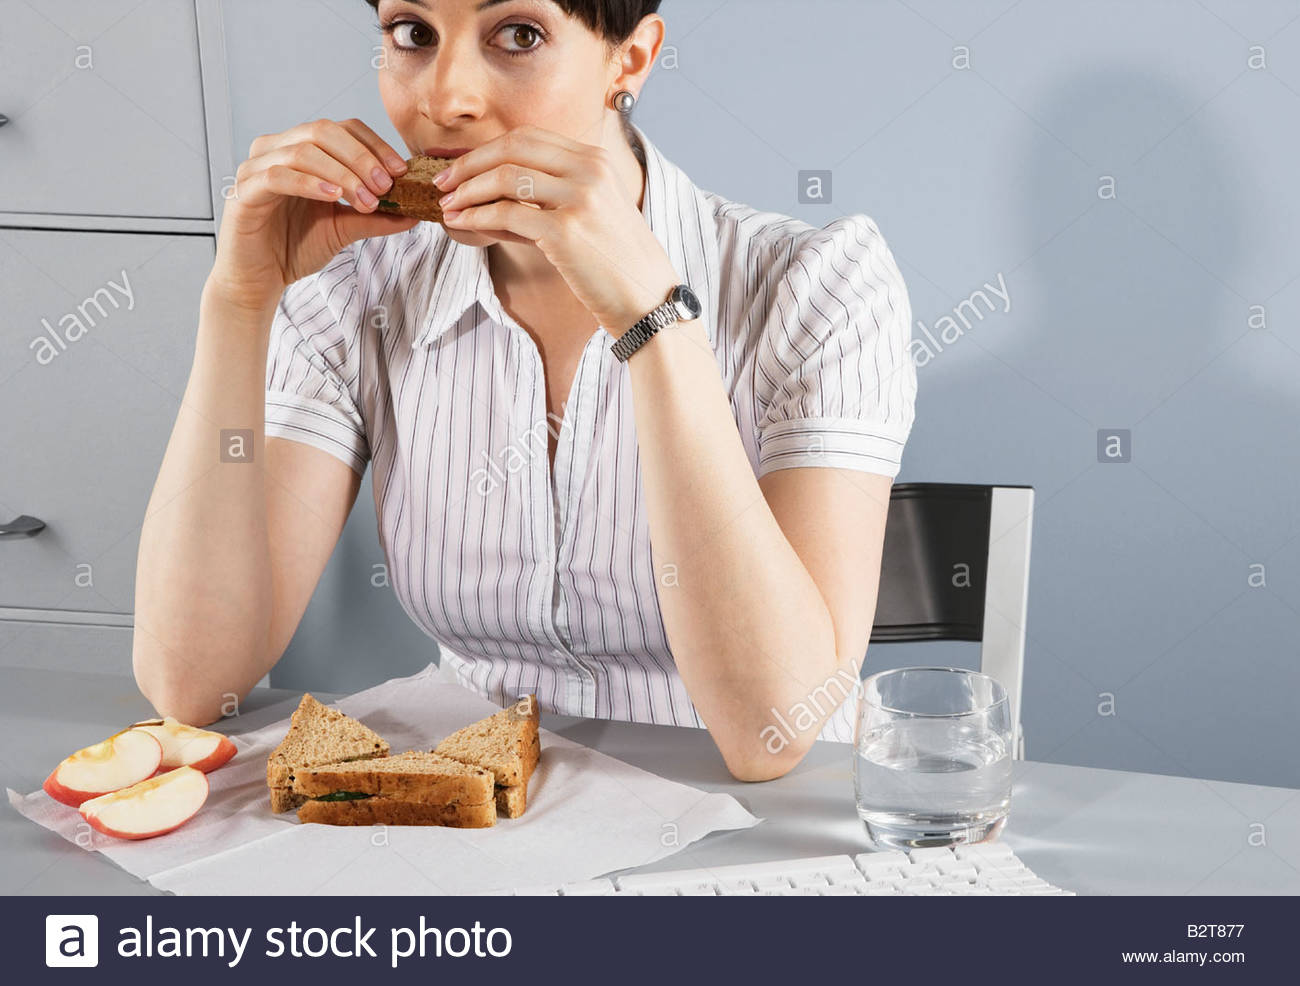 businesswoman-eating-healthy-lunch-at-de